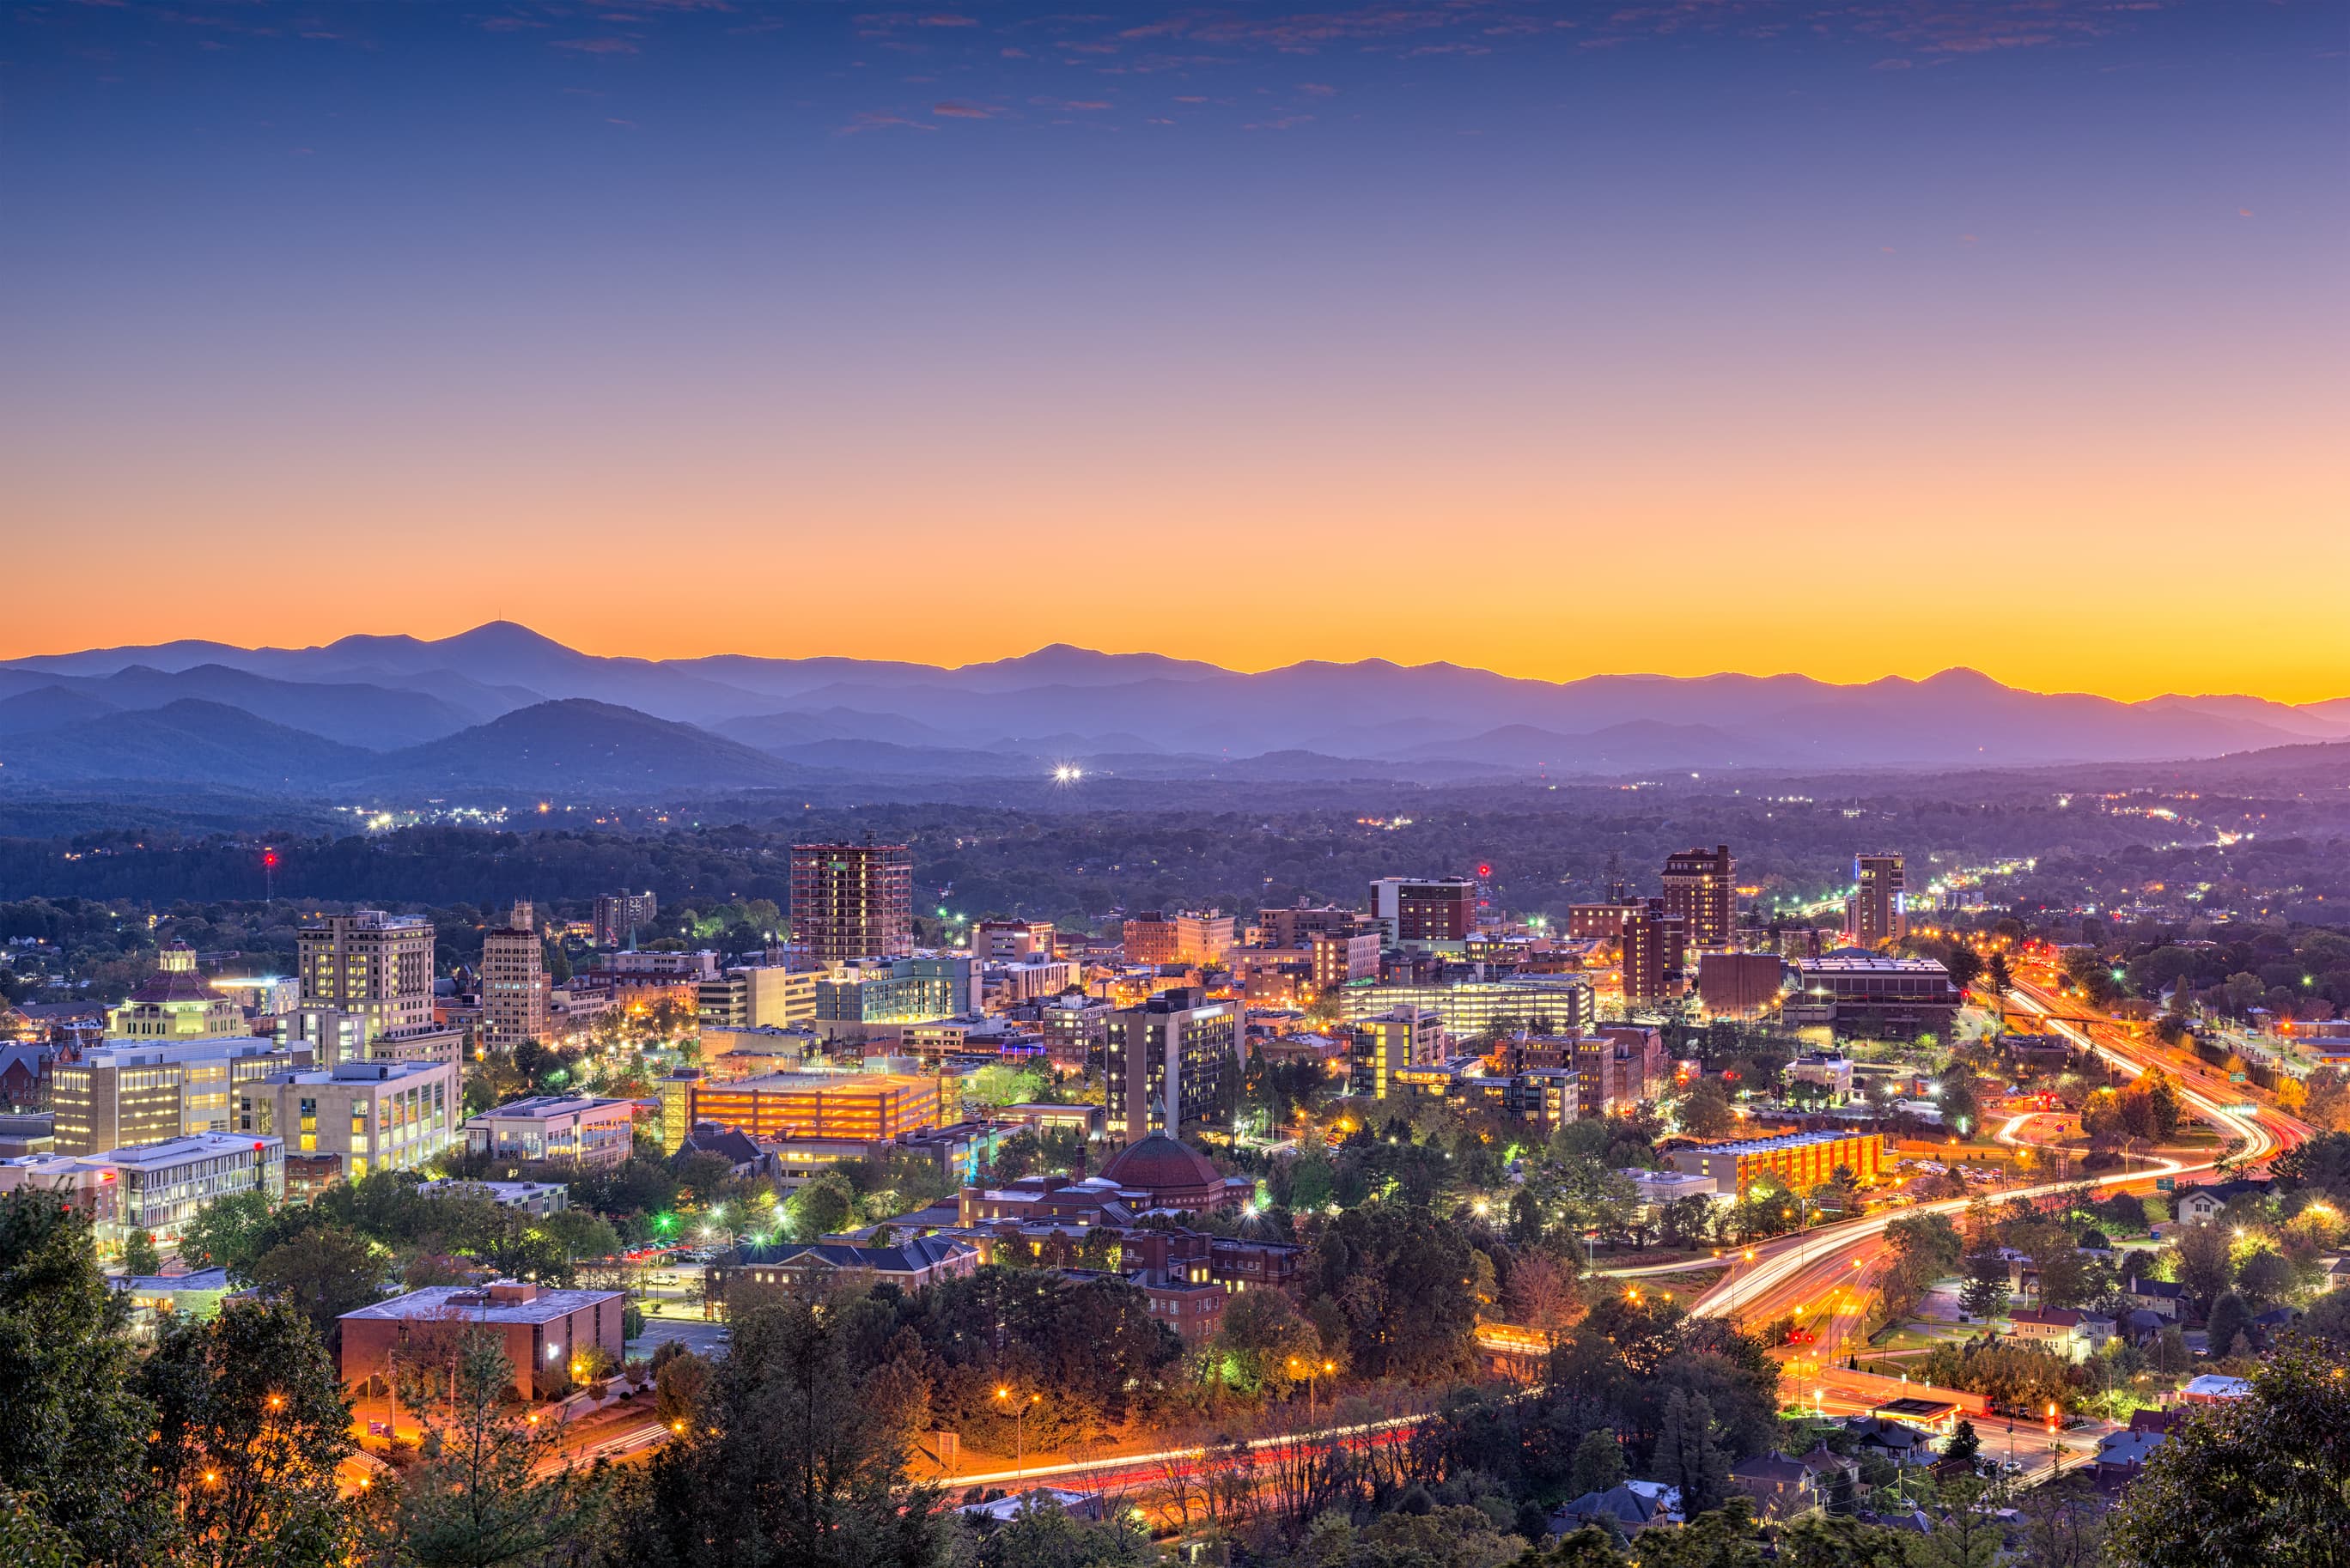 asheville skyline at dusk, mountains in background